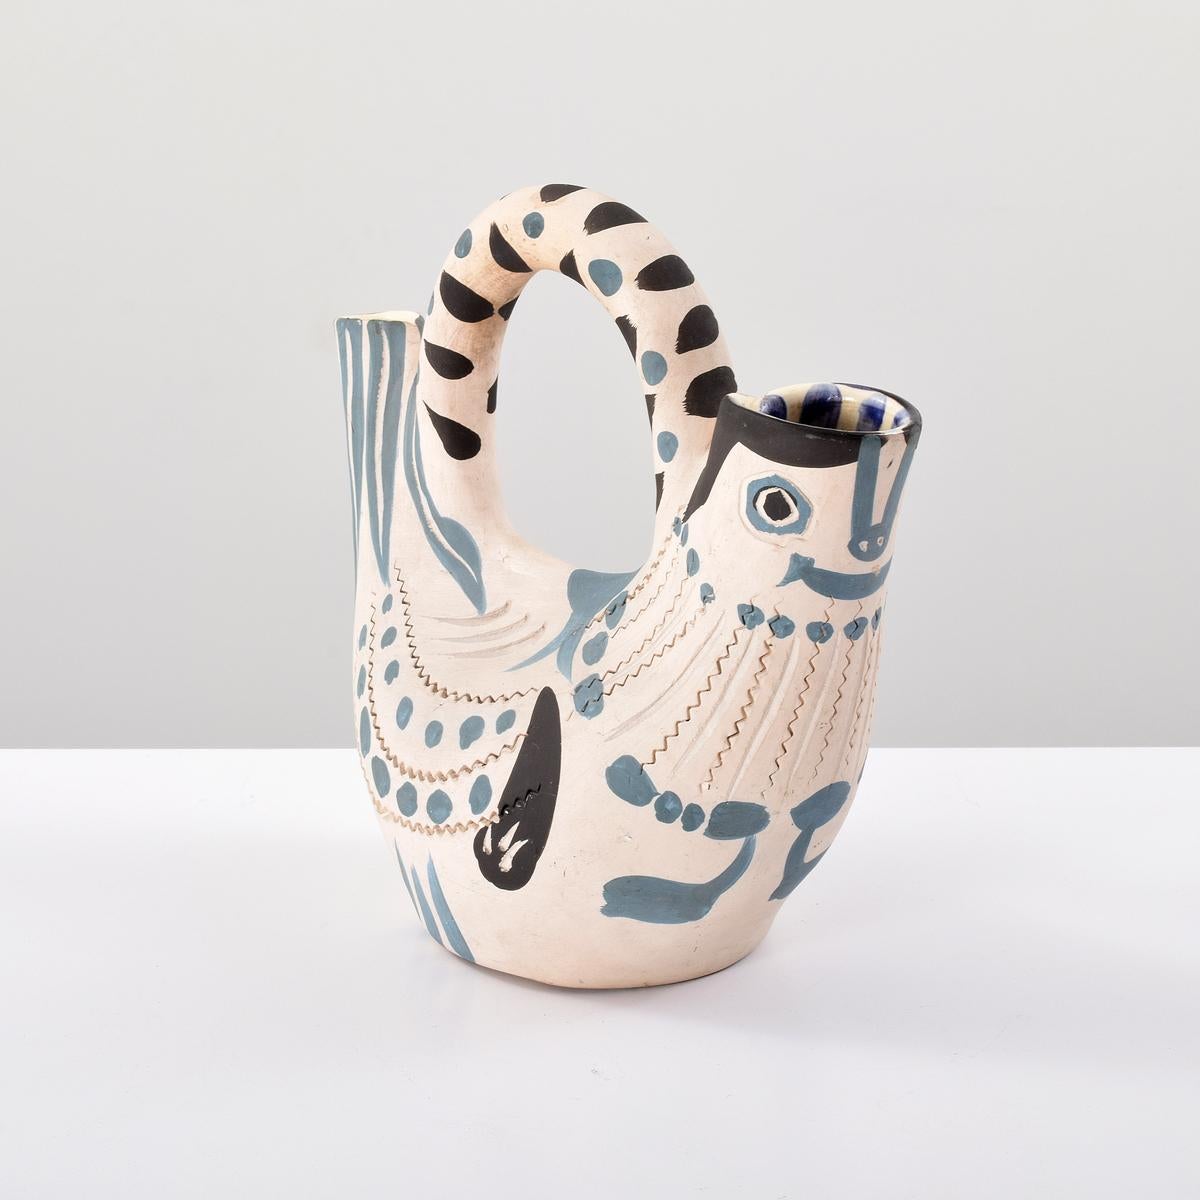 Pichet Espagnol vessel by Pablo Picasso (1881-1973). Work was conceived in 1954 and executed in a numbered edition of 300.

Markings: stamped, marked and numbered (Edition Picasso, 60/300, Madoura, Edition Picasso (underneath glaze), Madoura Plein